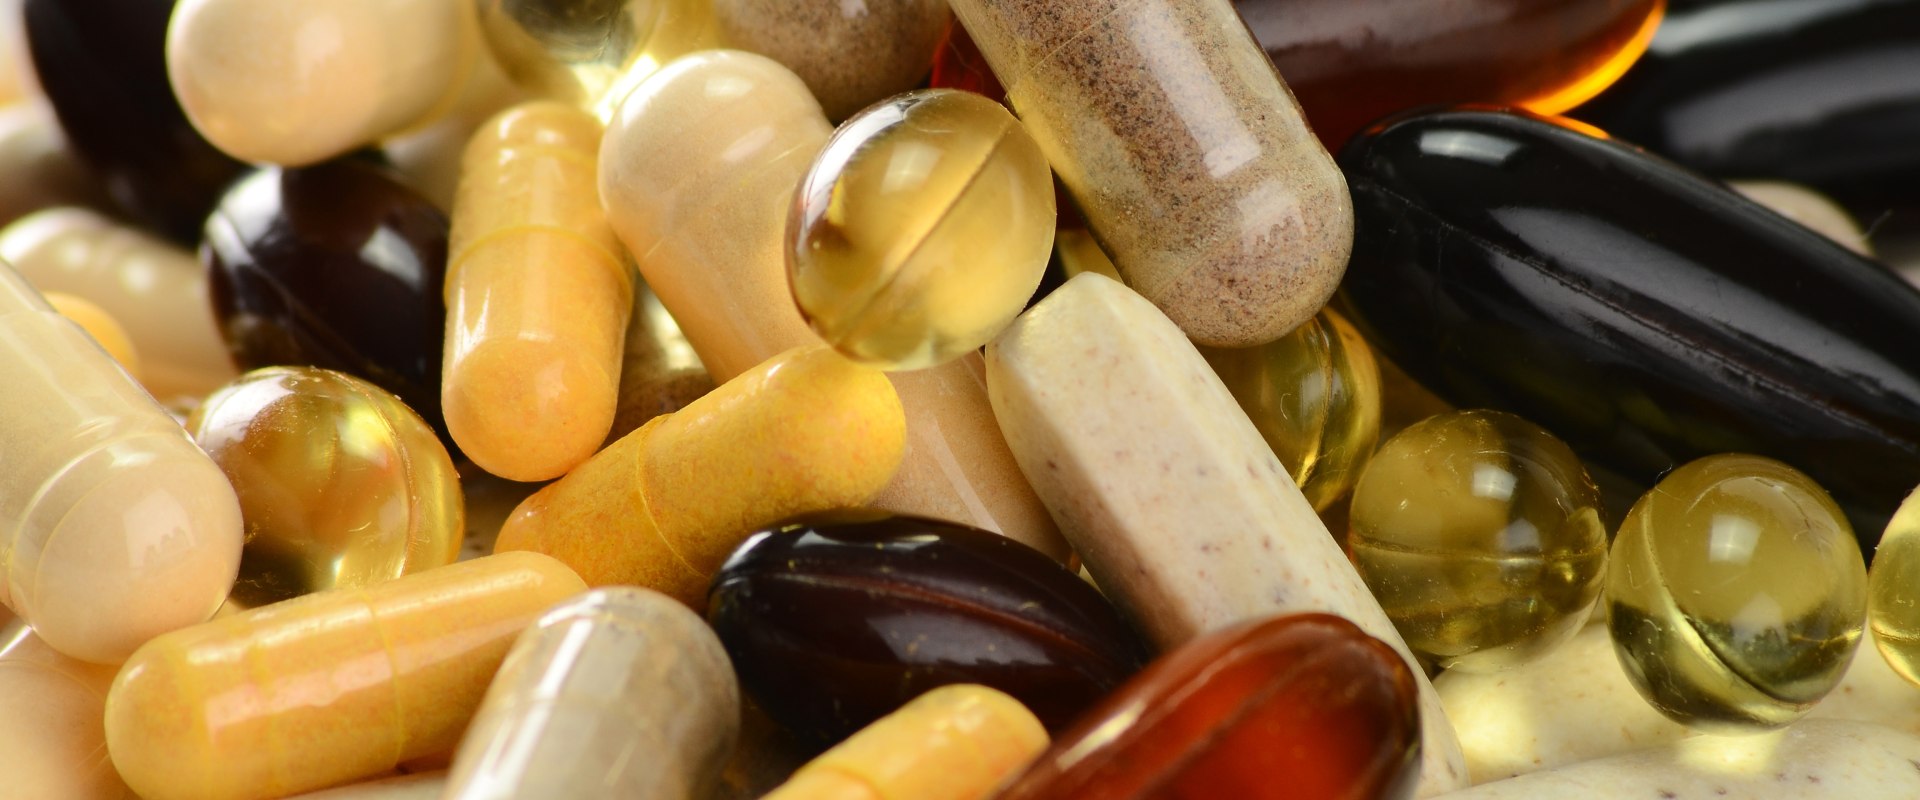 The Difference Between Natural and Synthetic Dietary Supplements: An Expert's Perspective